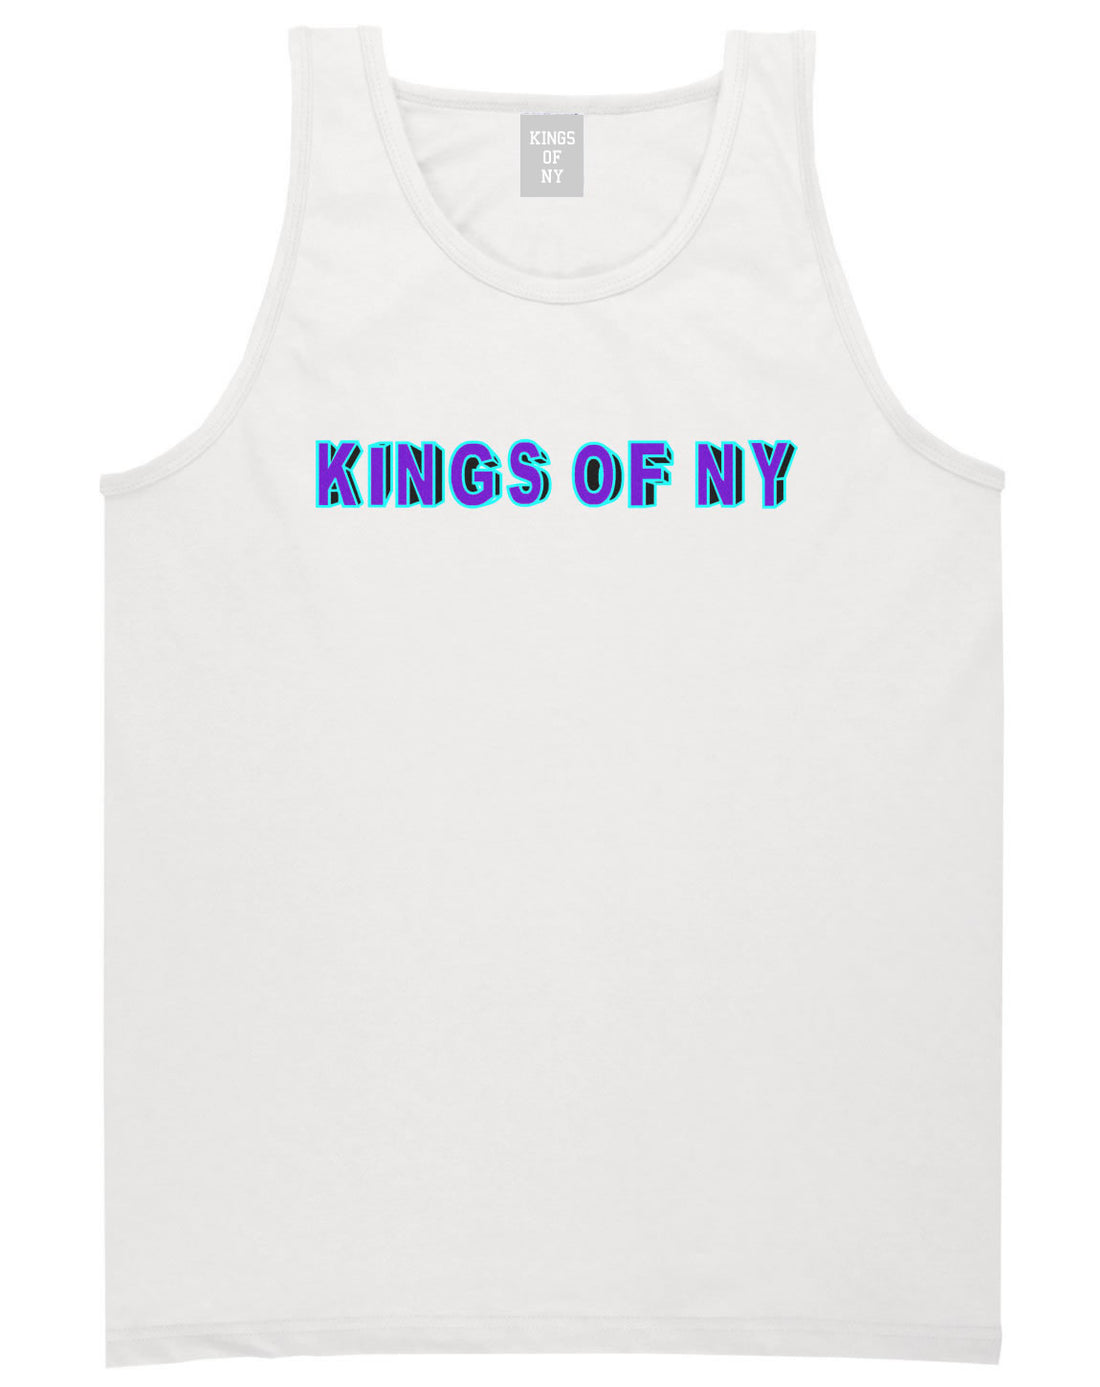 Bright Block Letters Tank Top in White by Kings Of NY